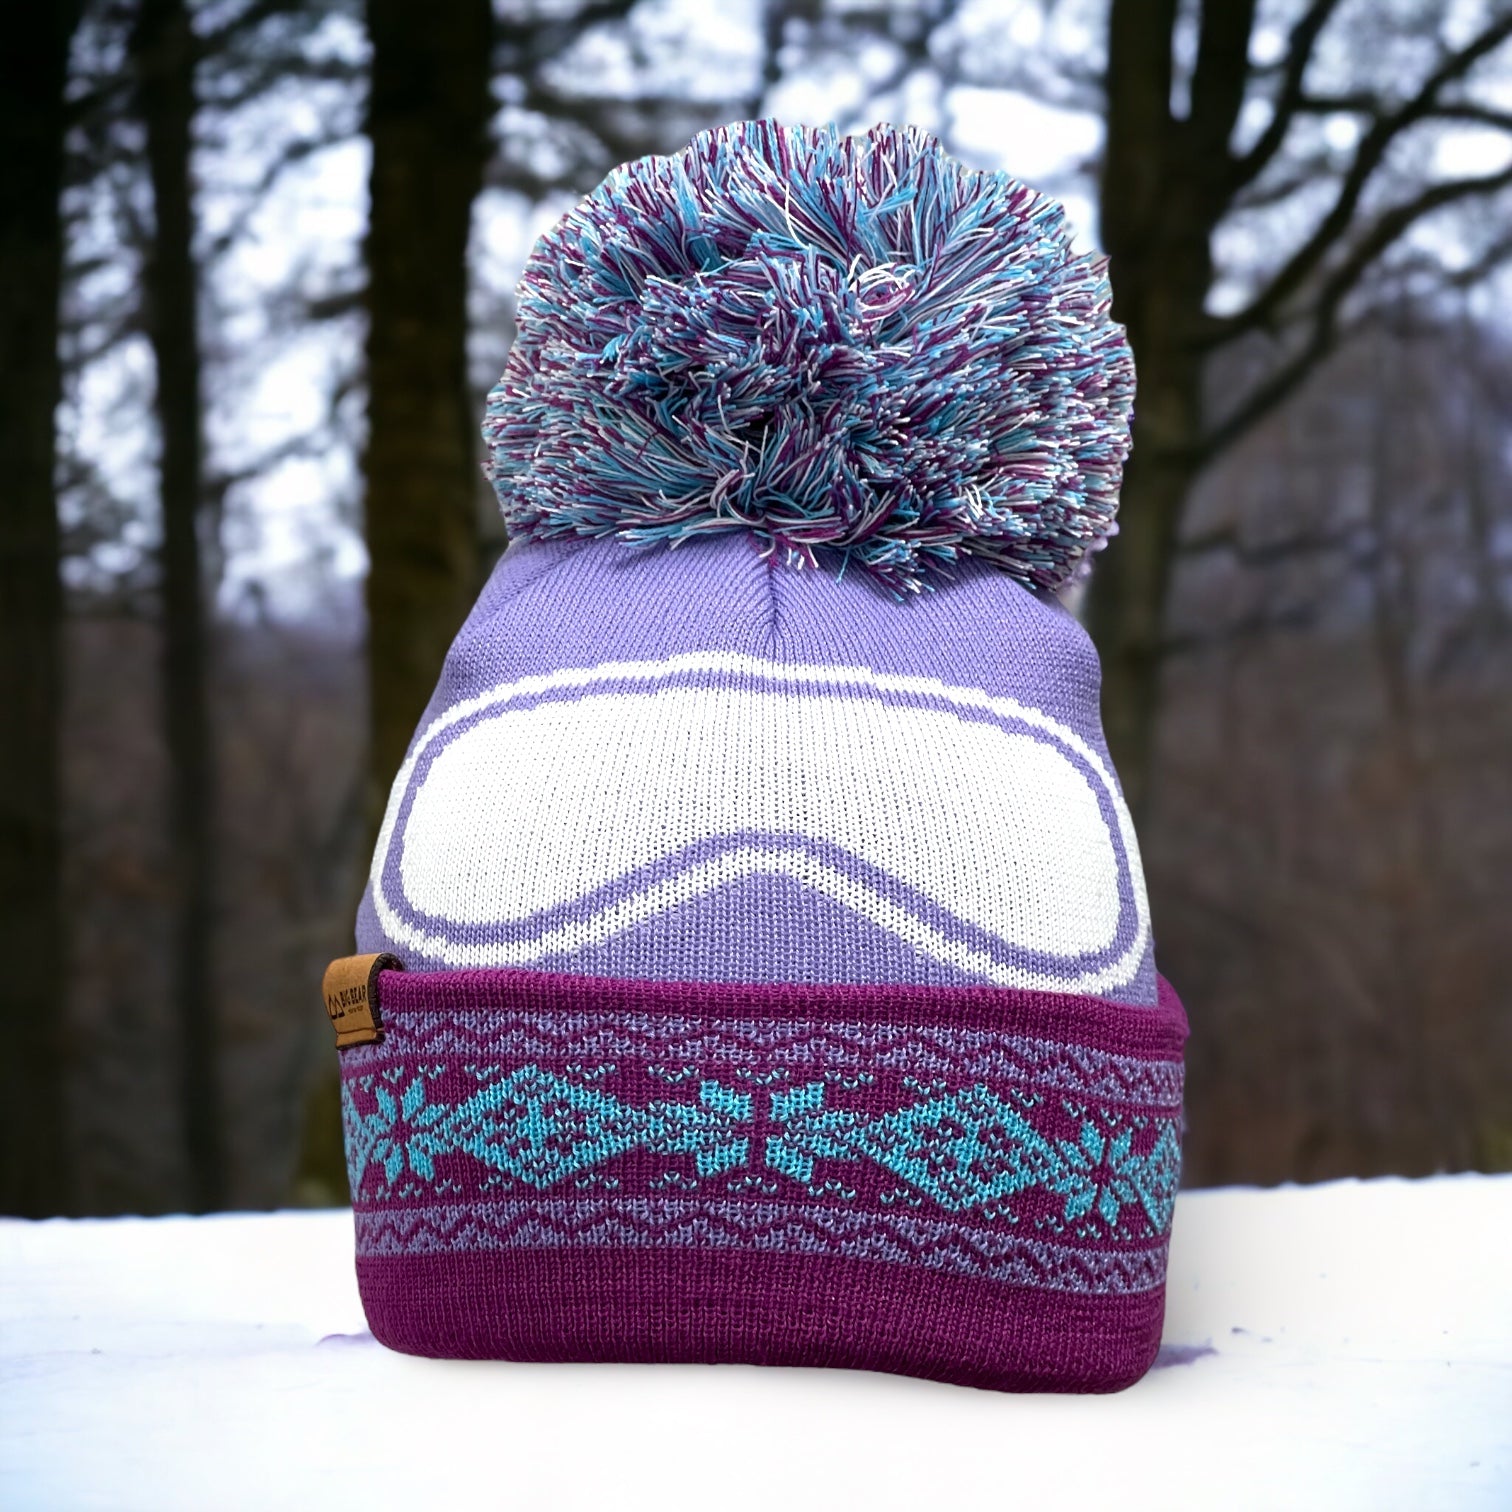 Mixed Purple & Blue throughout the beanie with White ski Goggles